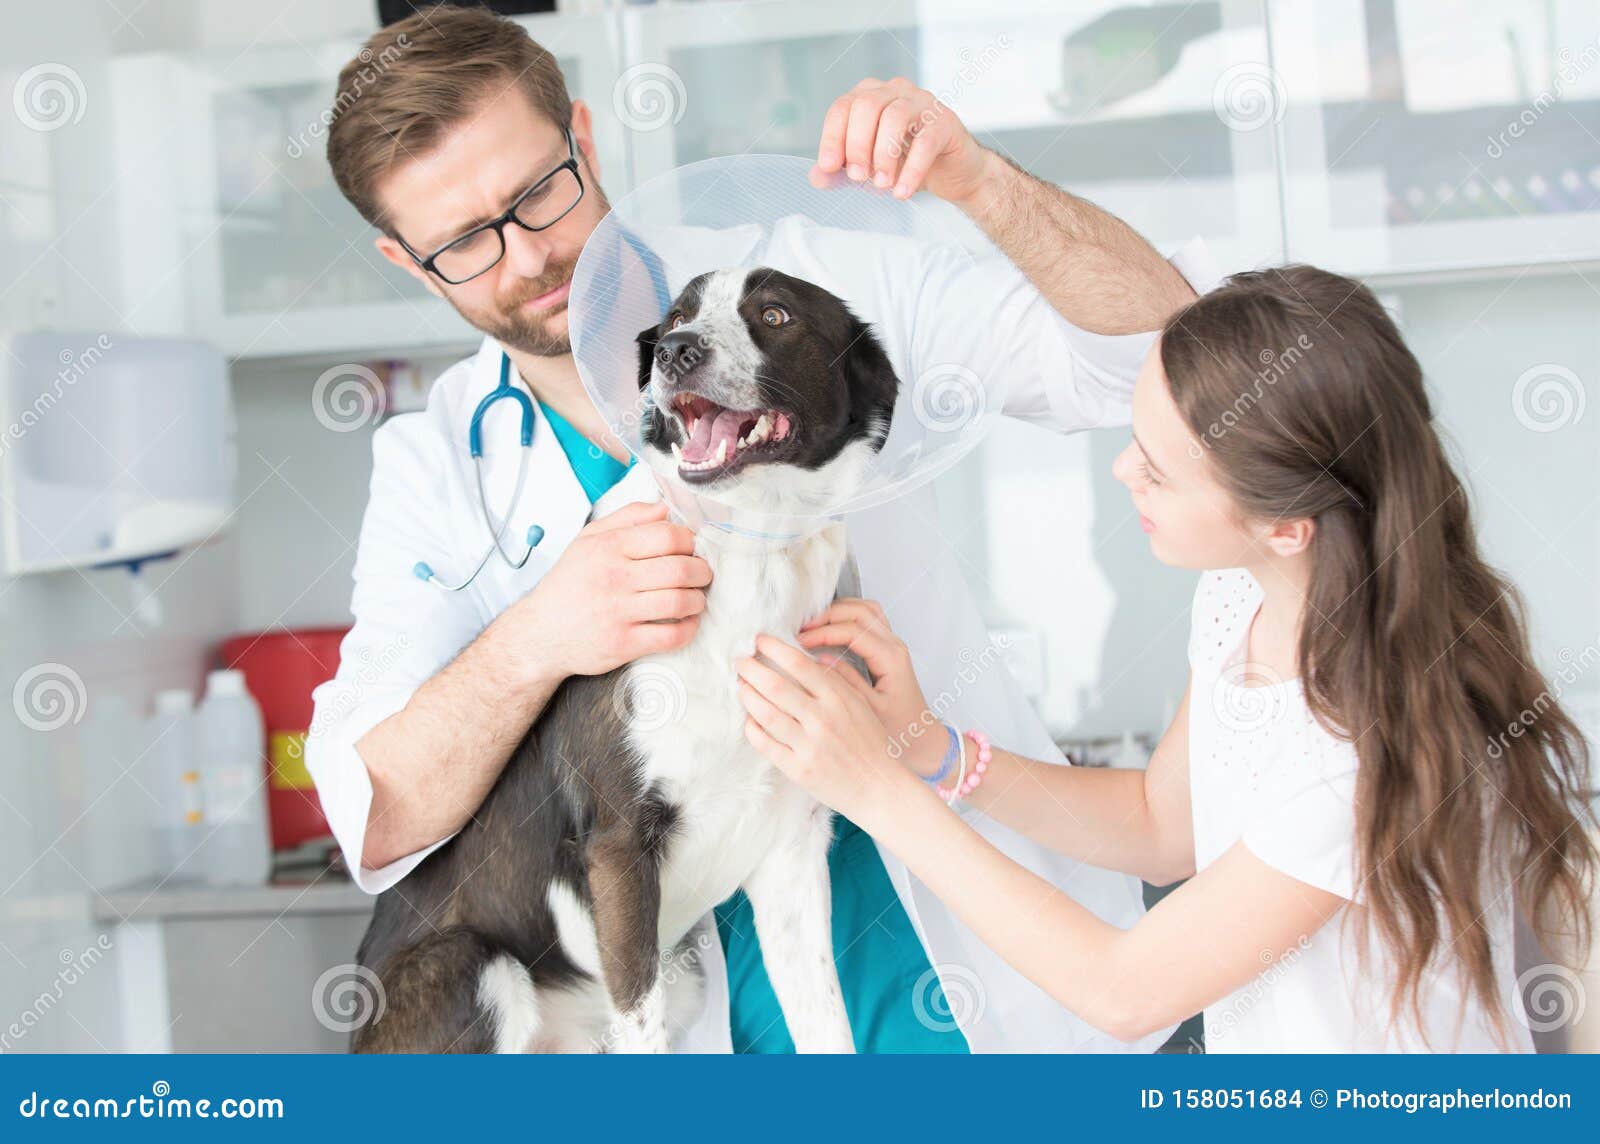 Veterinary Doctor and Girl Holding Cone Collar on Dog at Clinic Stock Photo  - Image of holding, doctor: 158051684